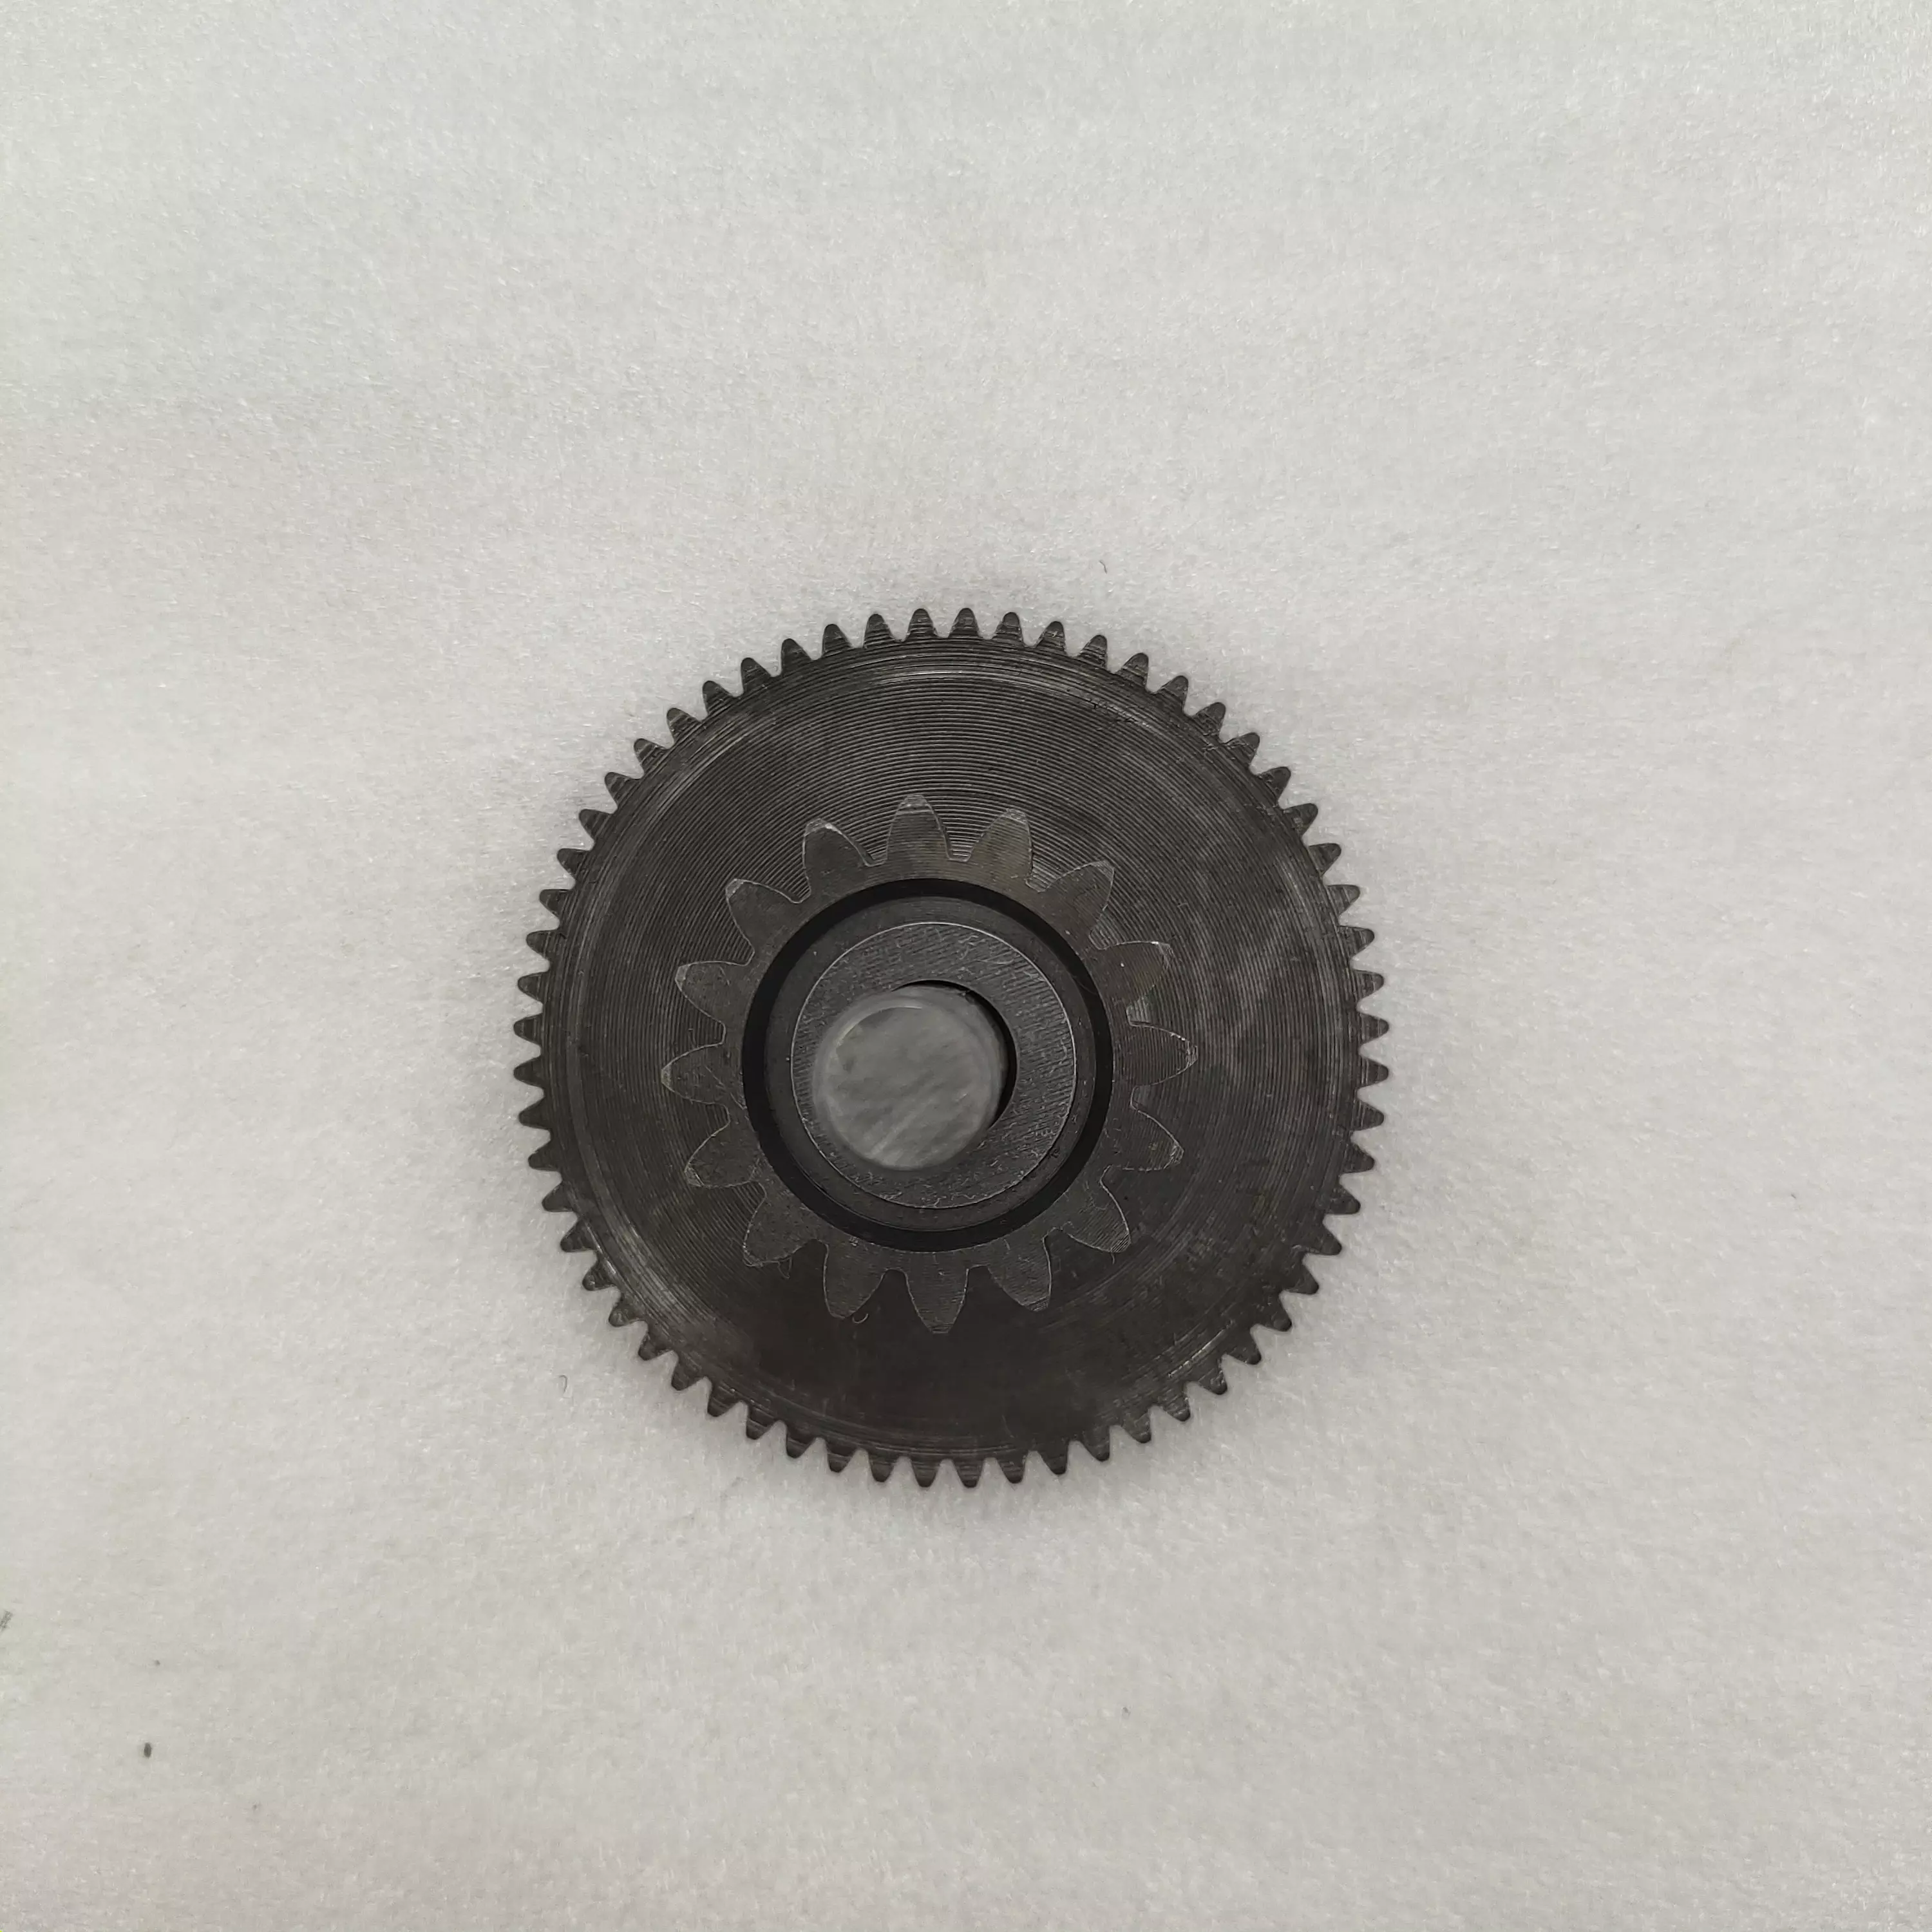 DAYANG motorcycle  lifan engine parts double spur gear high precison for 150cc 250cc tricycle engine spare parts